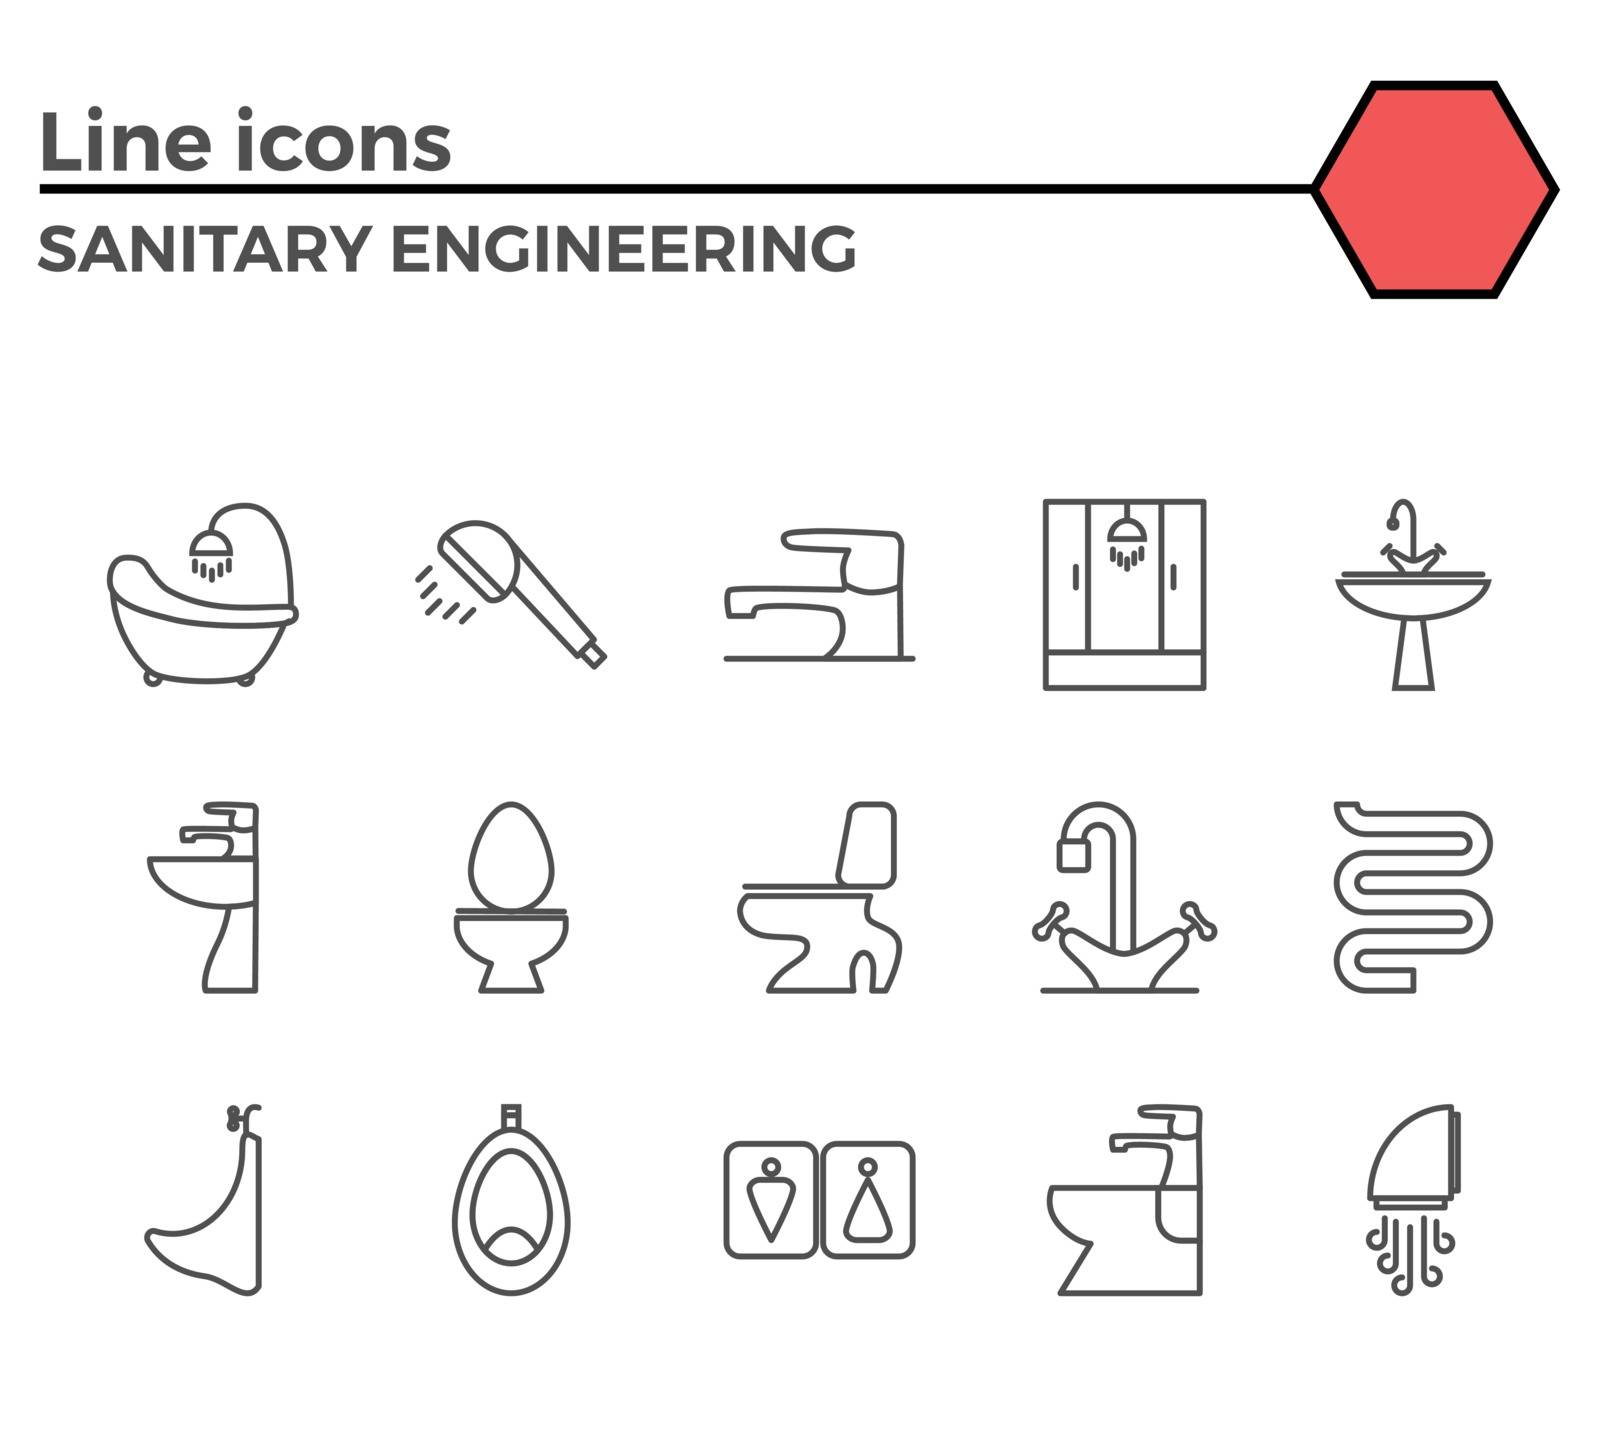 Sanitary Engineering Thin Line Related Icons Set on White Background. Simple Mono Linear Pictogram Pack Stroke Vector Logo Concept for Web Graphics.